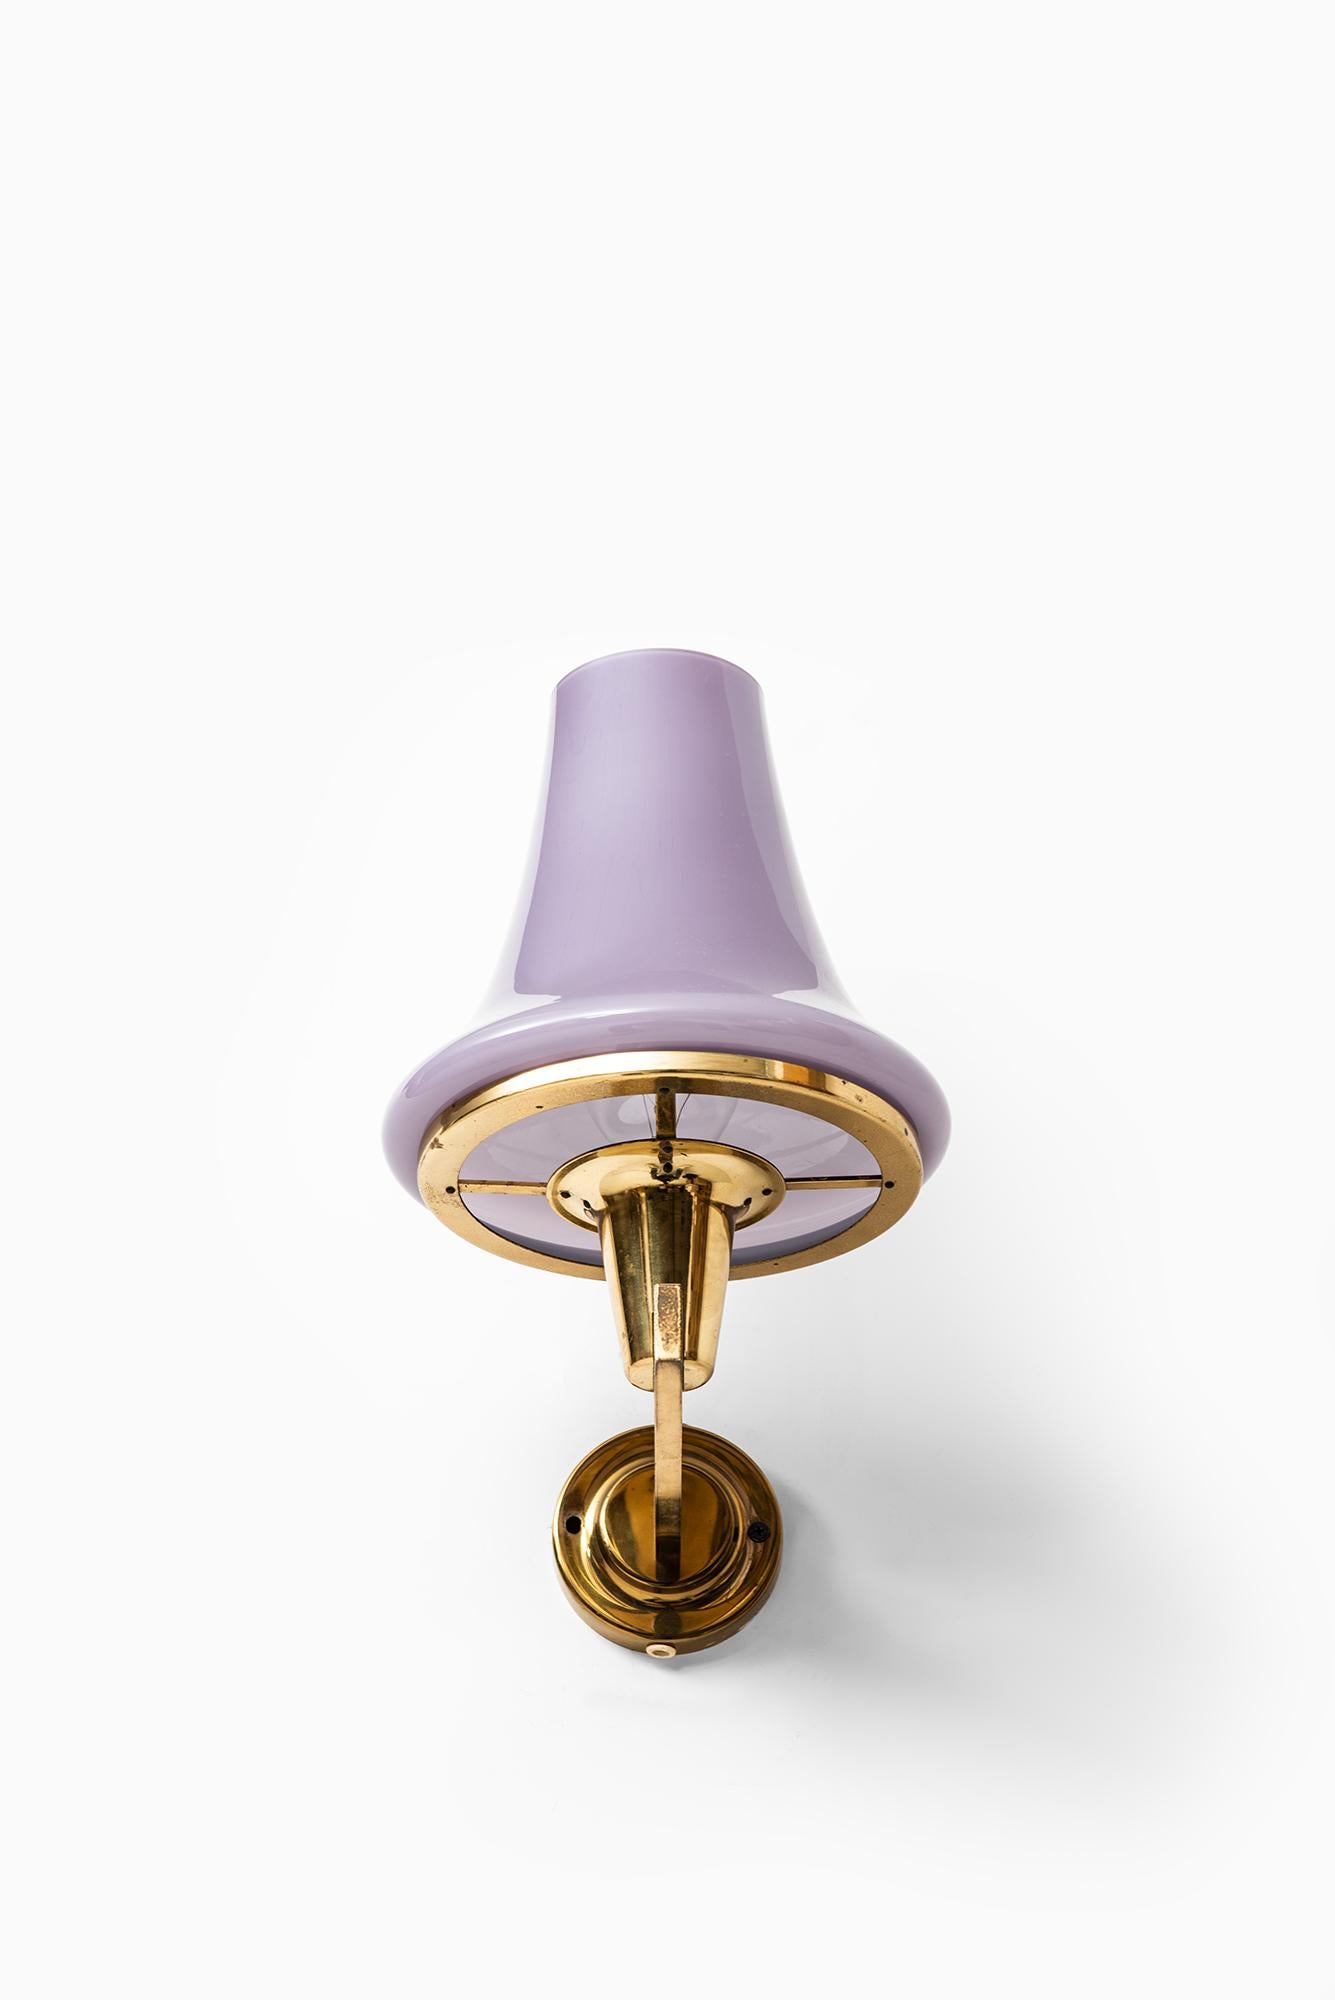 Swedish Hans-Agne Jakobsson Wall Lamp Model V-241 in Brass and Purple Glass